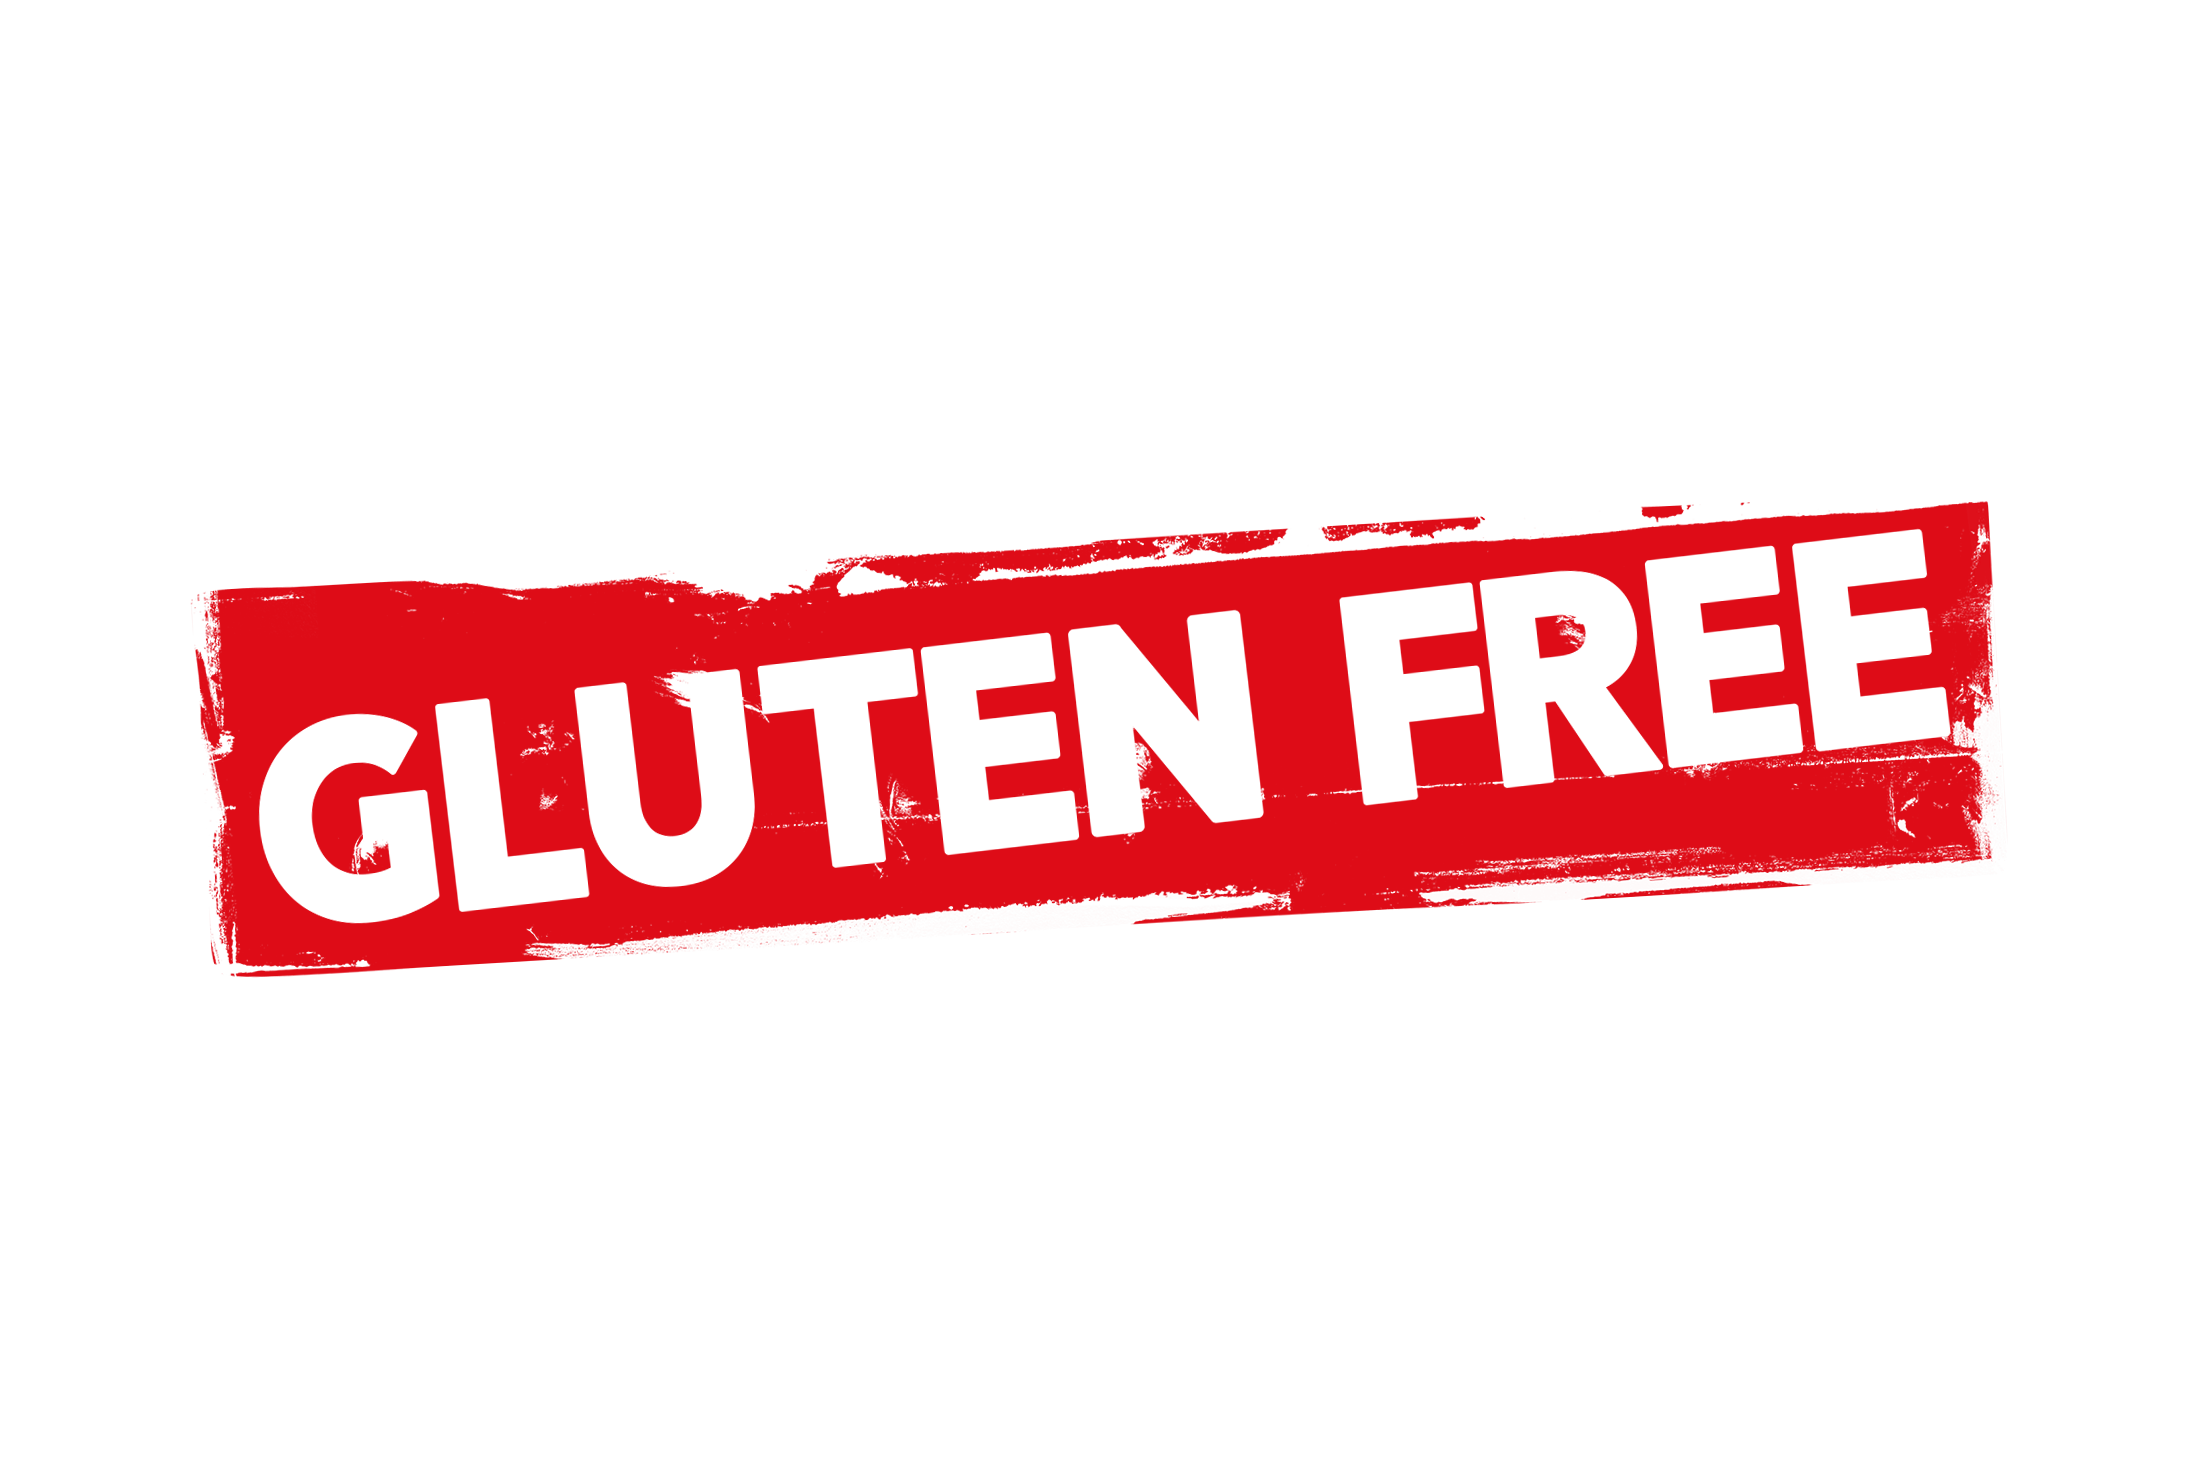 Grunge gluten free label PNG and PSD